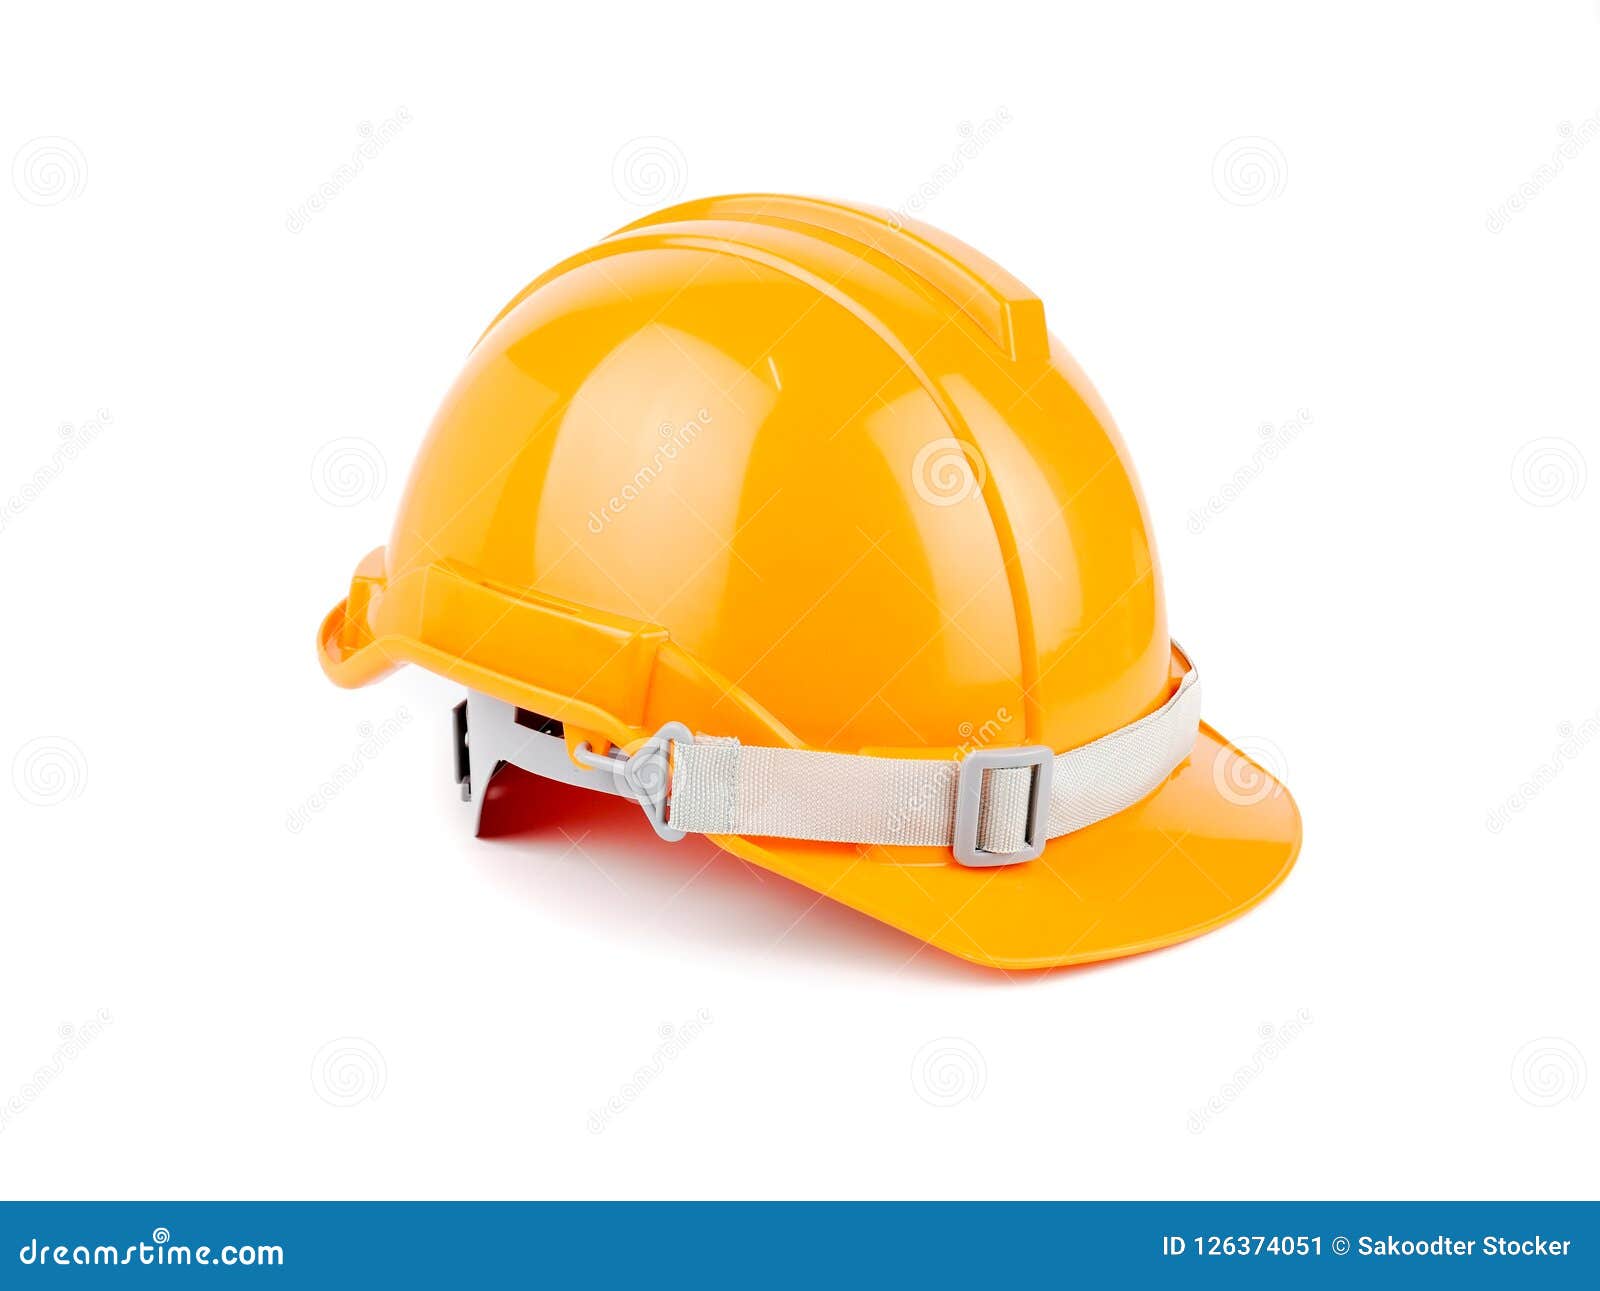 Plastic Orange Safety Helmet Or Construction Hard Hat Concept Safety Project Of Workmen As Engineer Isolated On White Background Stock Image Image Of Manufacture Business 126374051